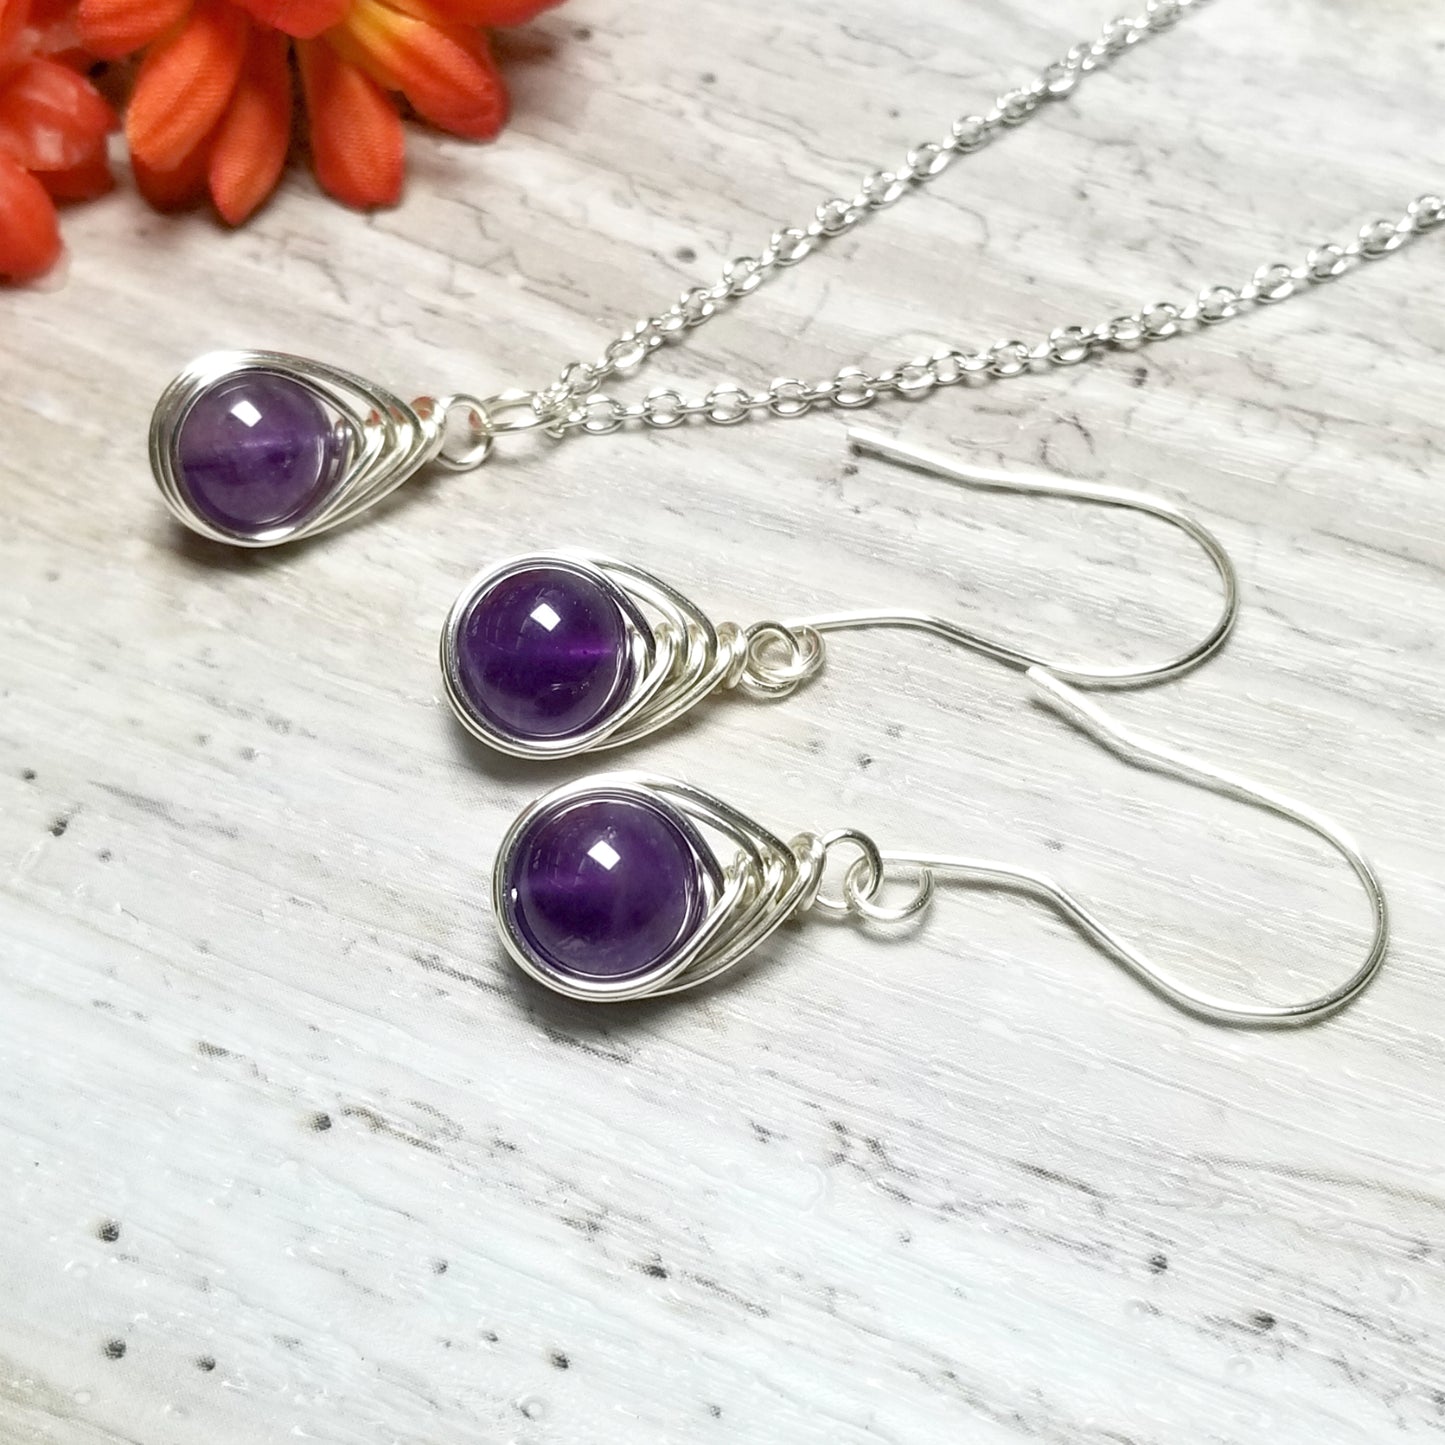 Matching Necklace Earrings Amethyst Jewelry Set